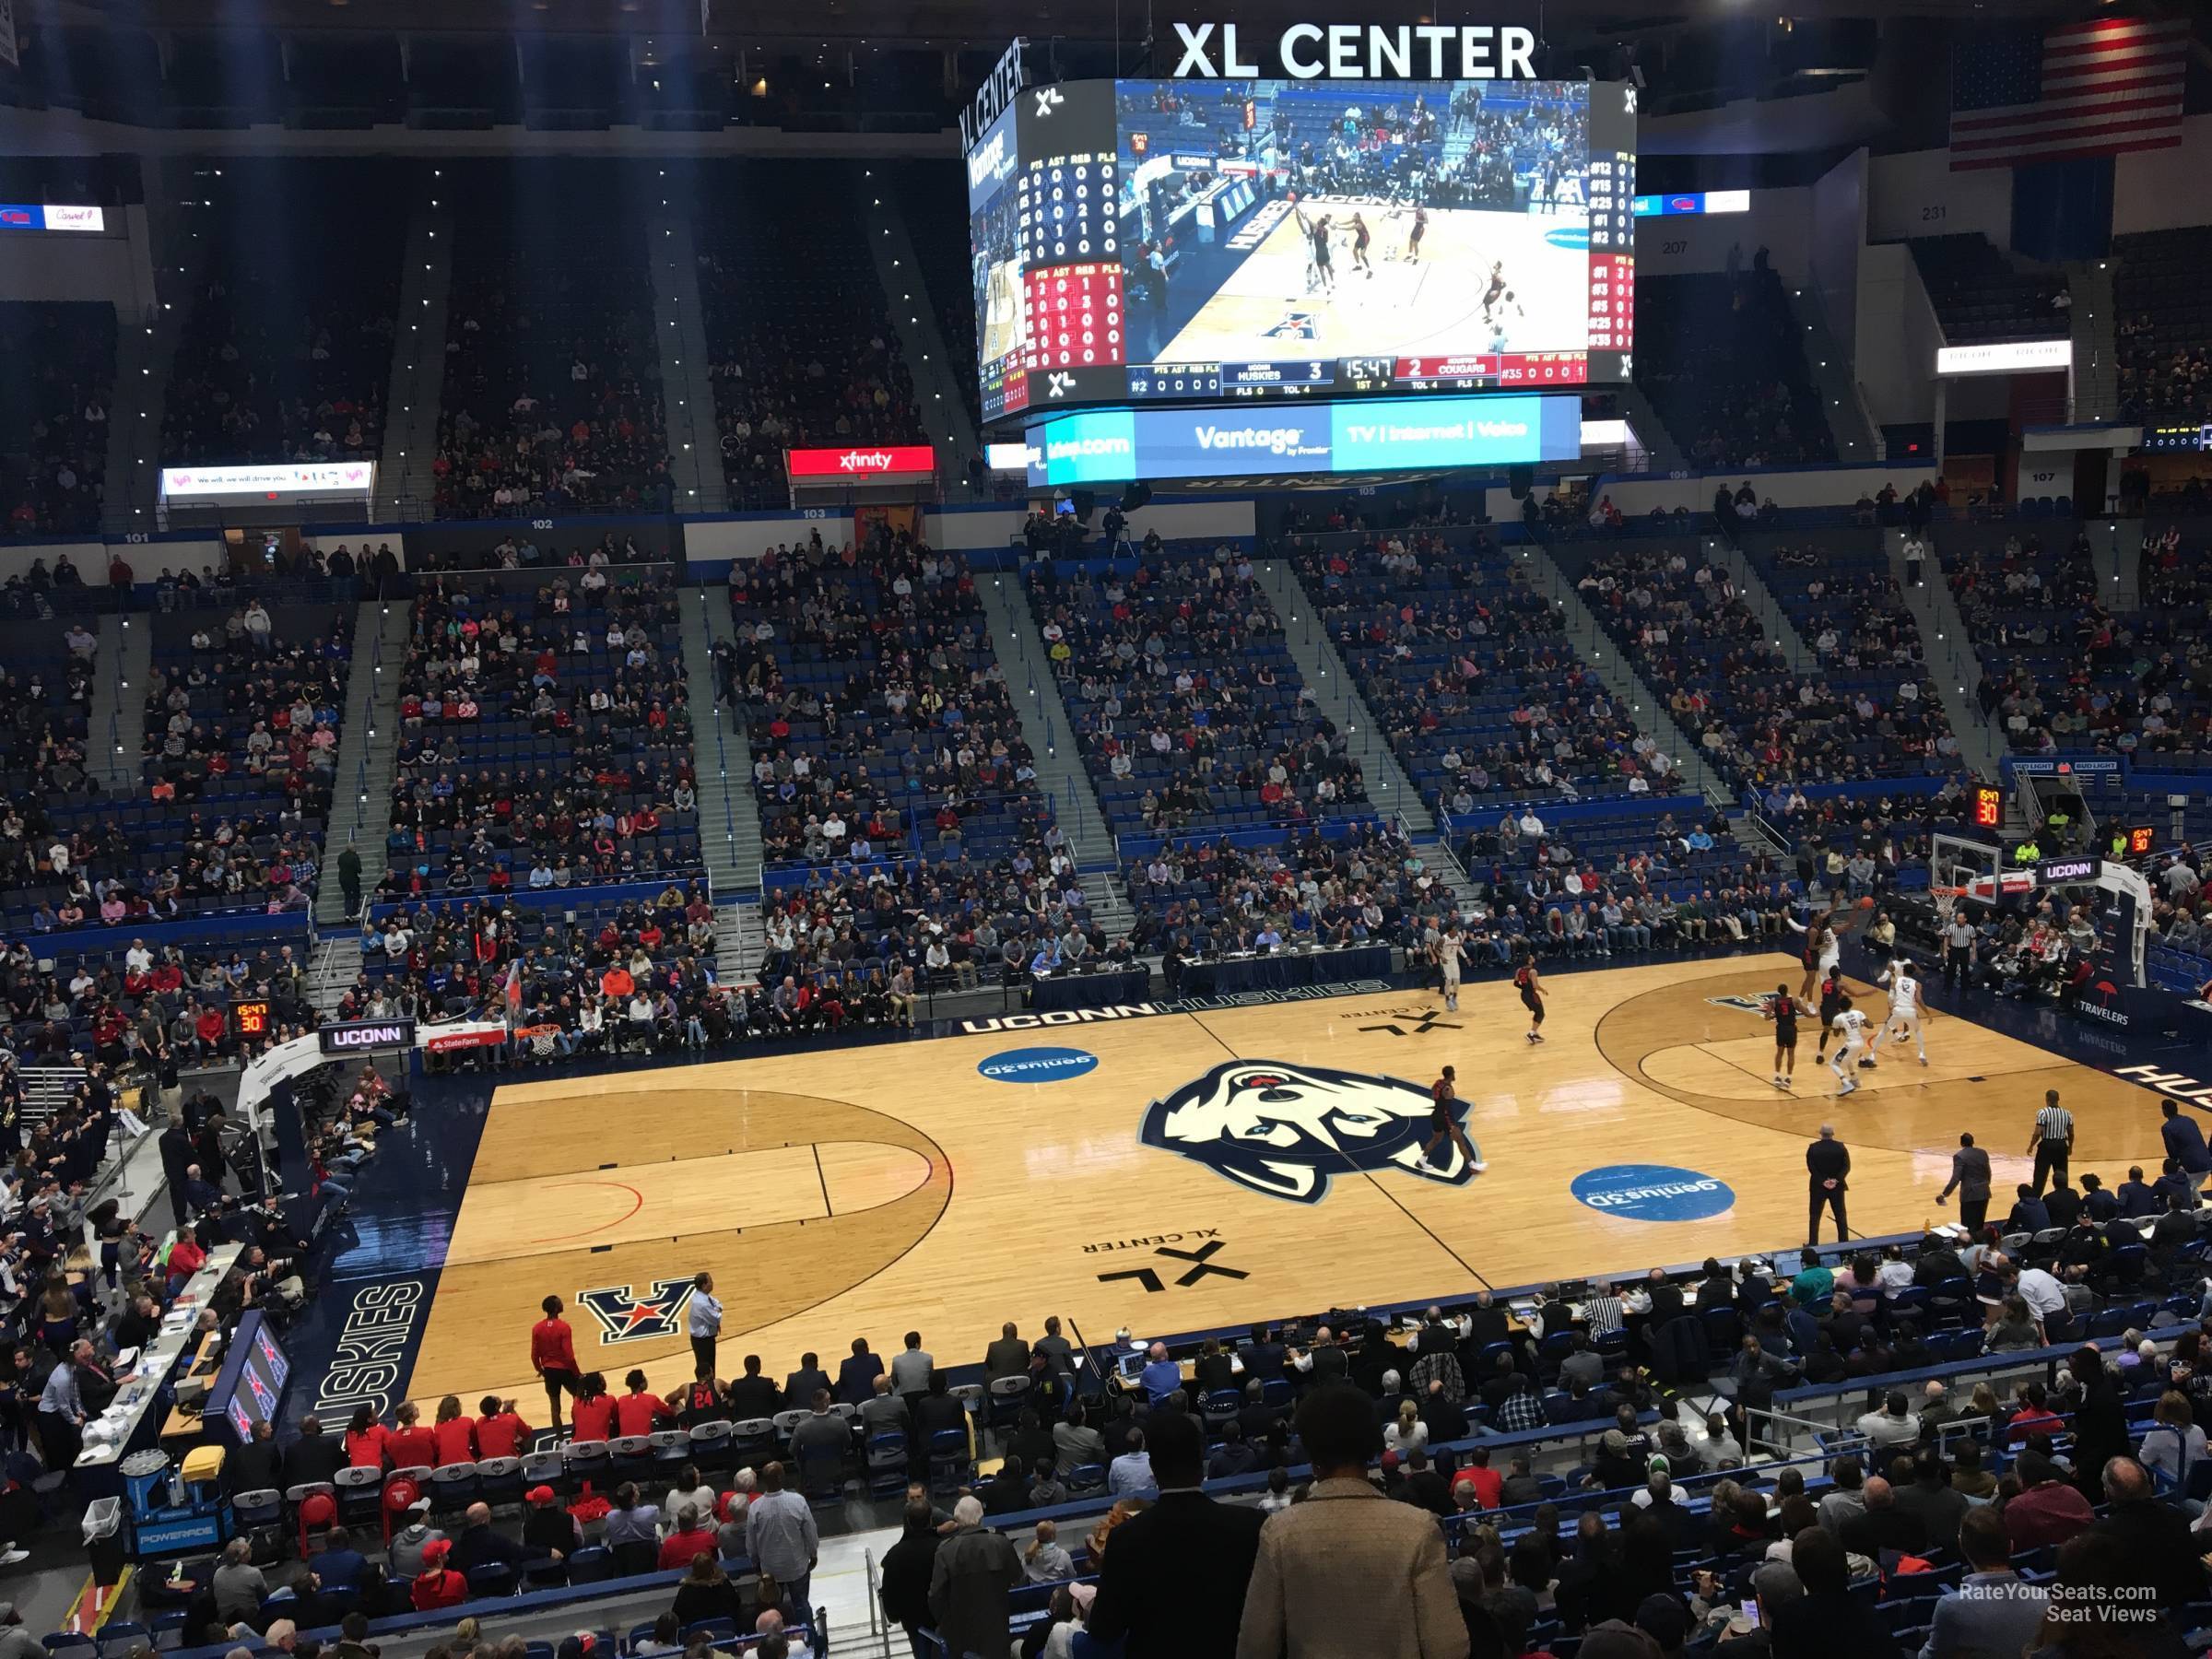 section 117, row r seat view  - xl center